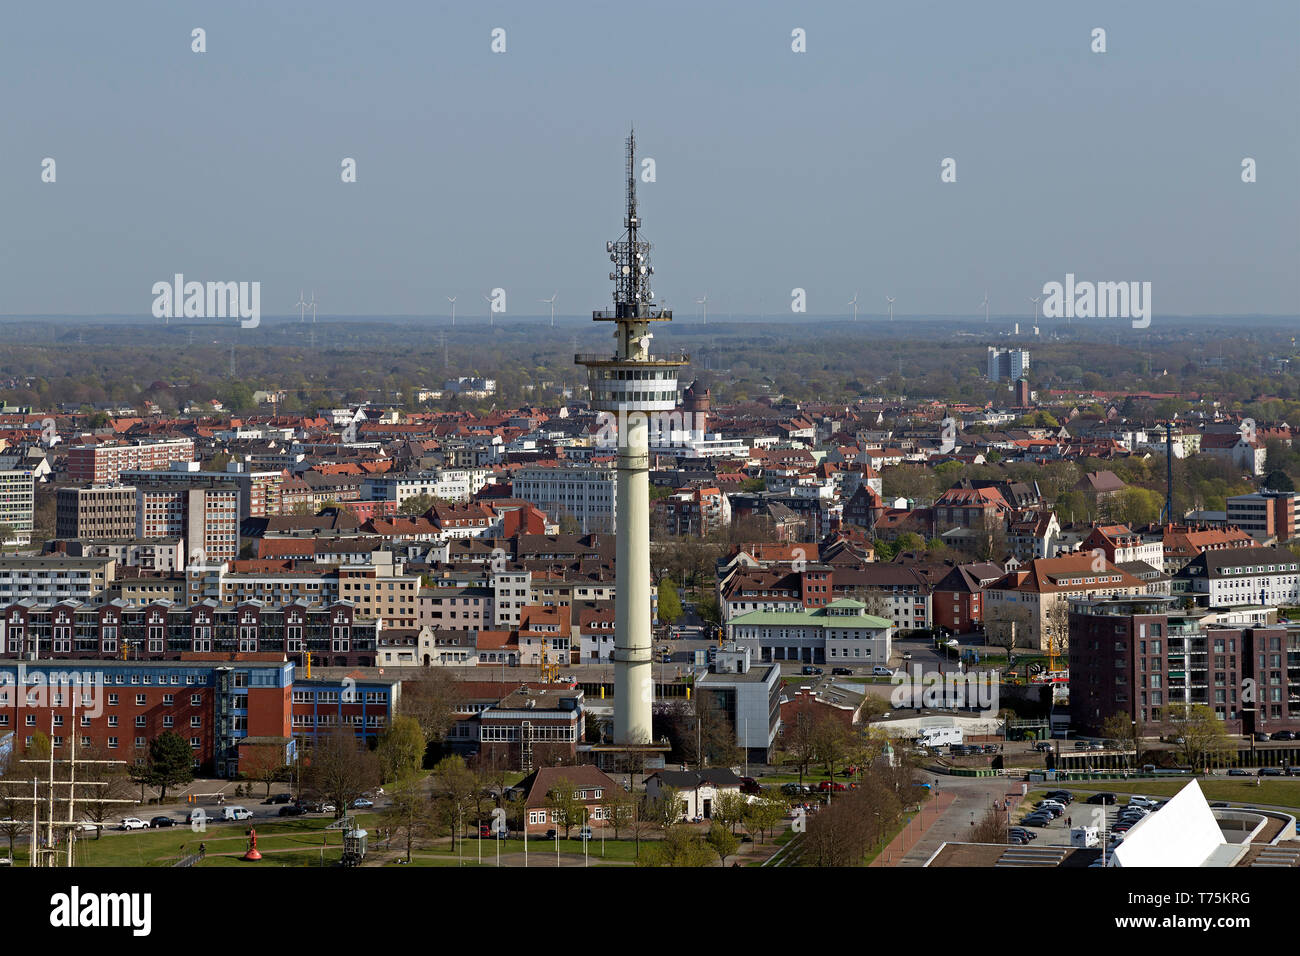 view of the television tower from the viewing platform of ATLANTIC Hotel Sail City, Bremerhaven, Bremen, Germany Stock Photo